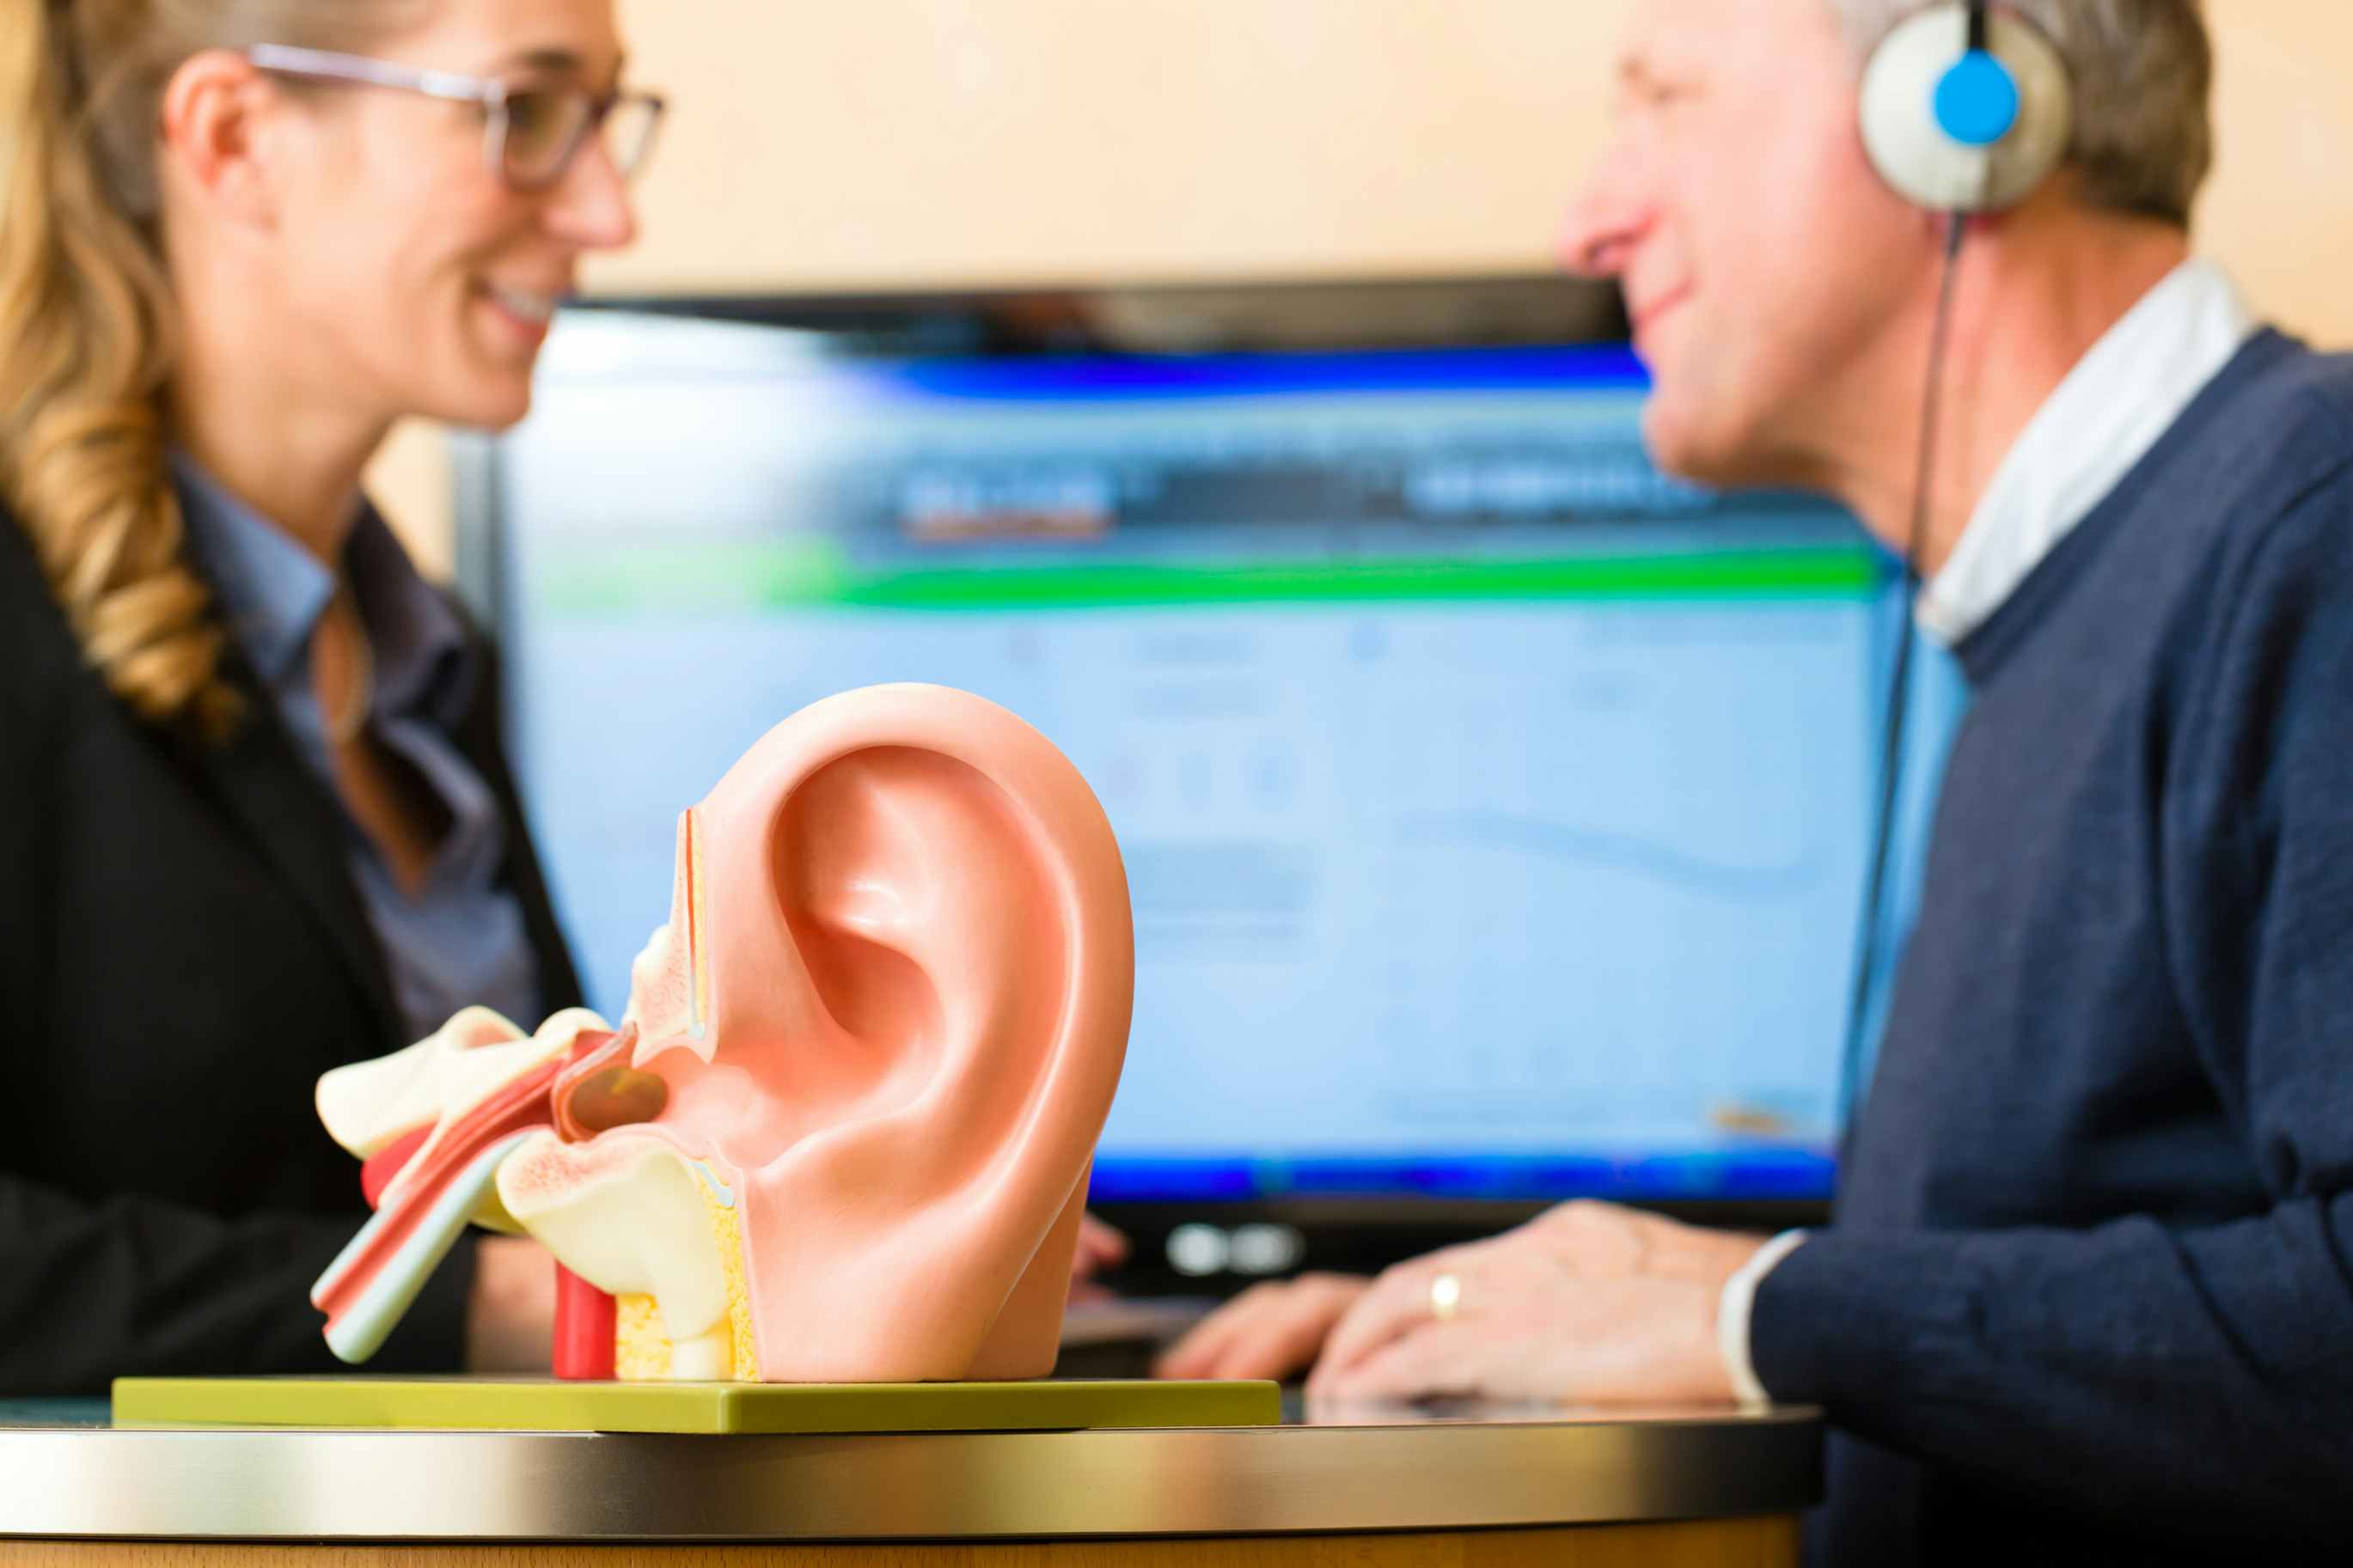 A female doctor gives a male patient a hearing test for a hearing aid